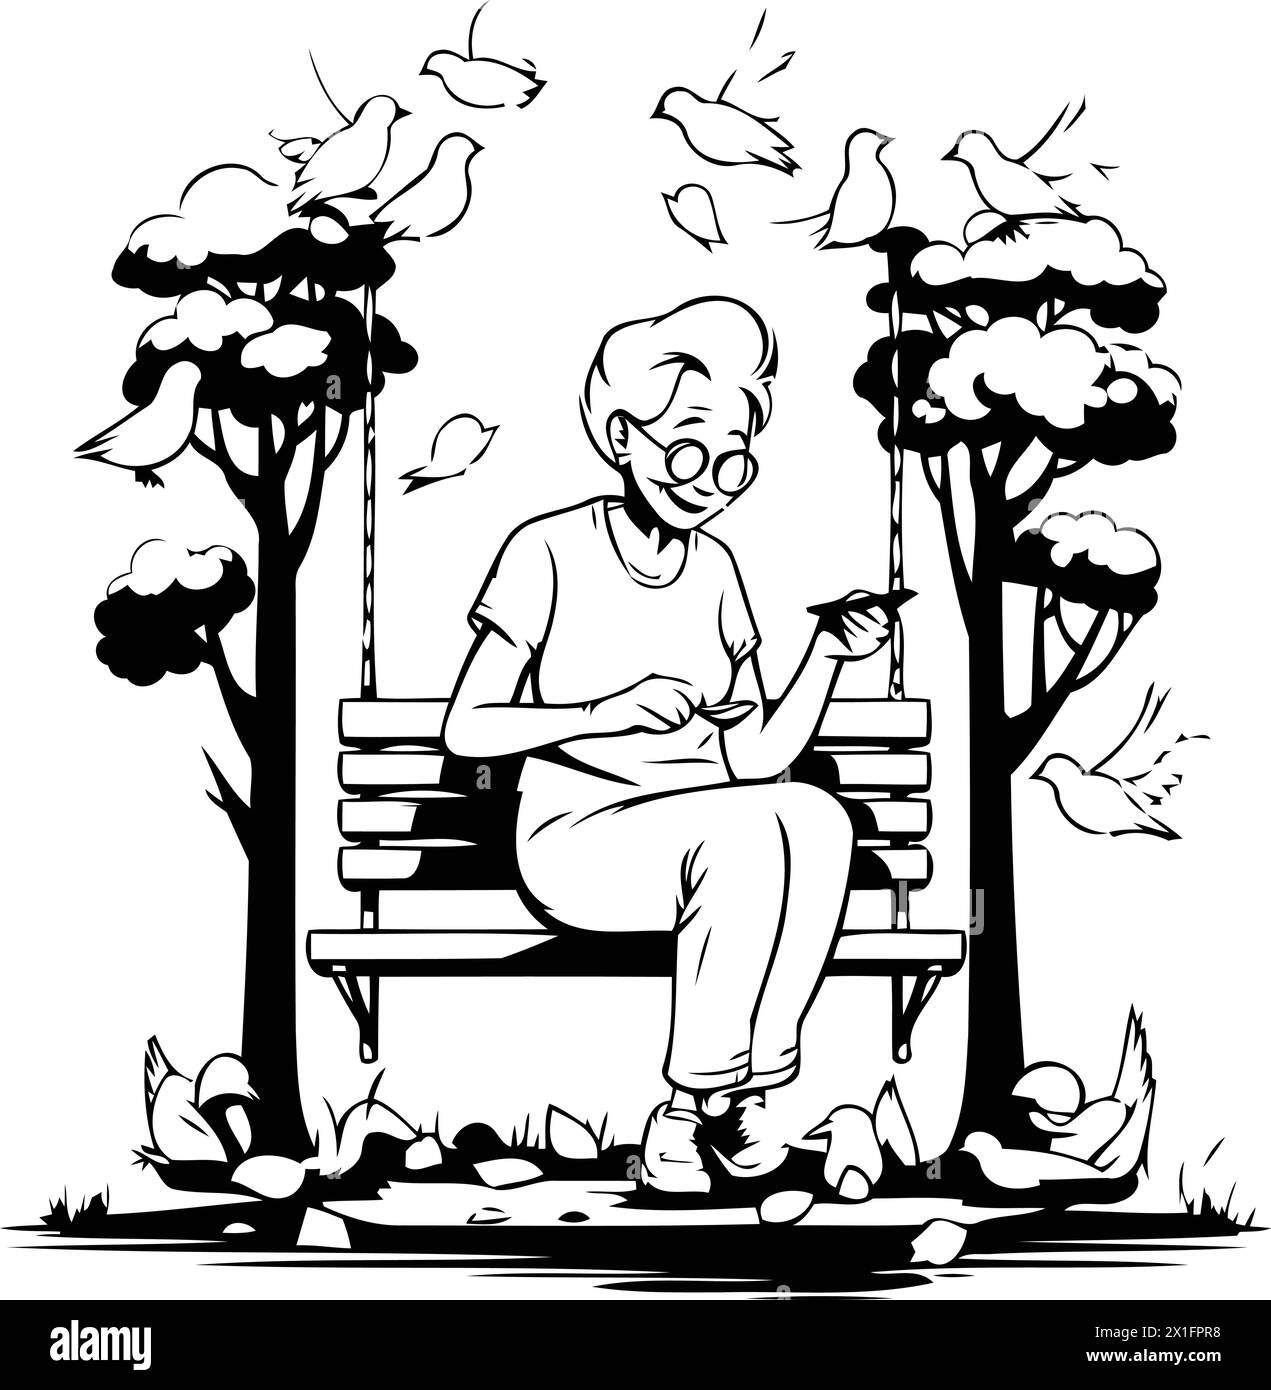 Elderly woman sitting on a bench and feeding pigeons. Vector illustration. Stock Vector